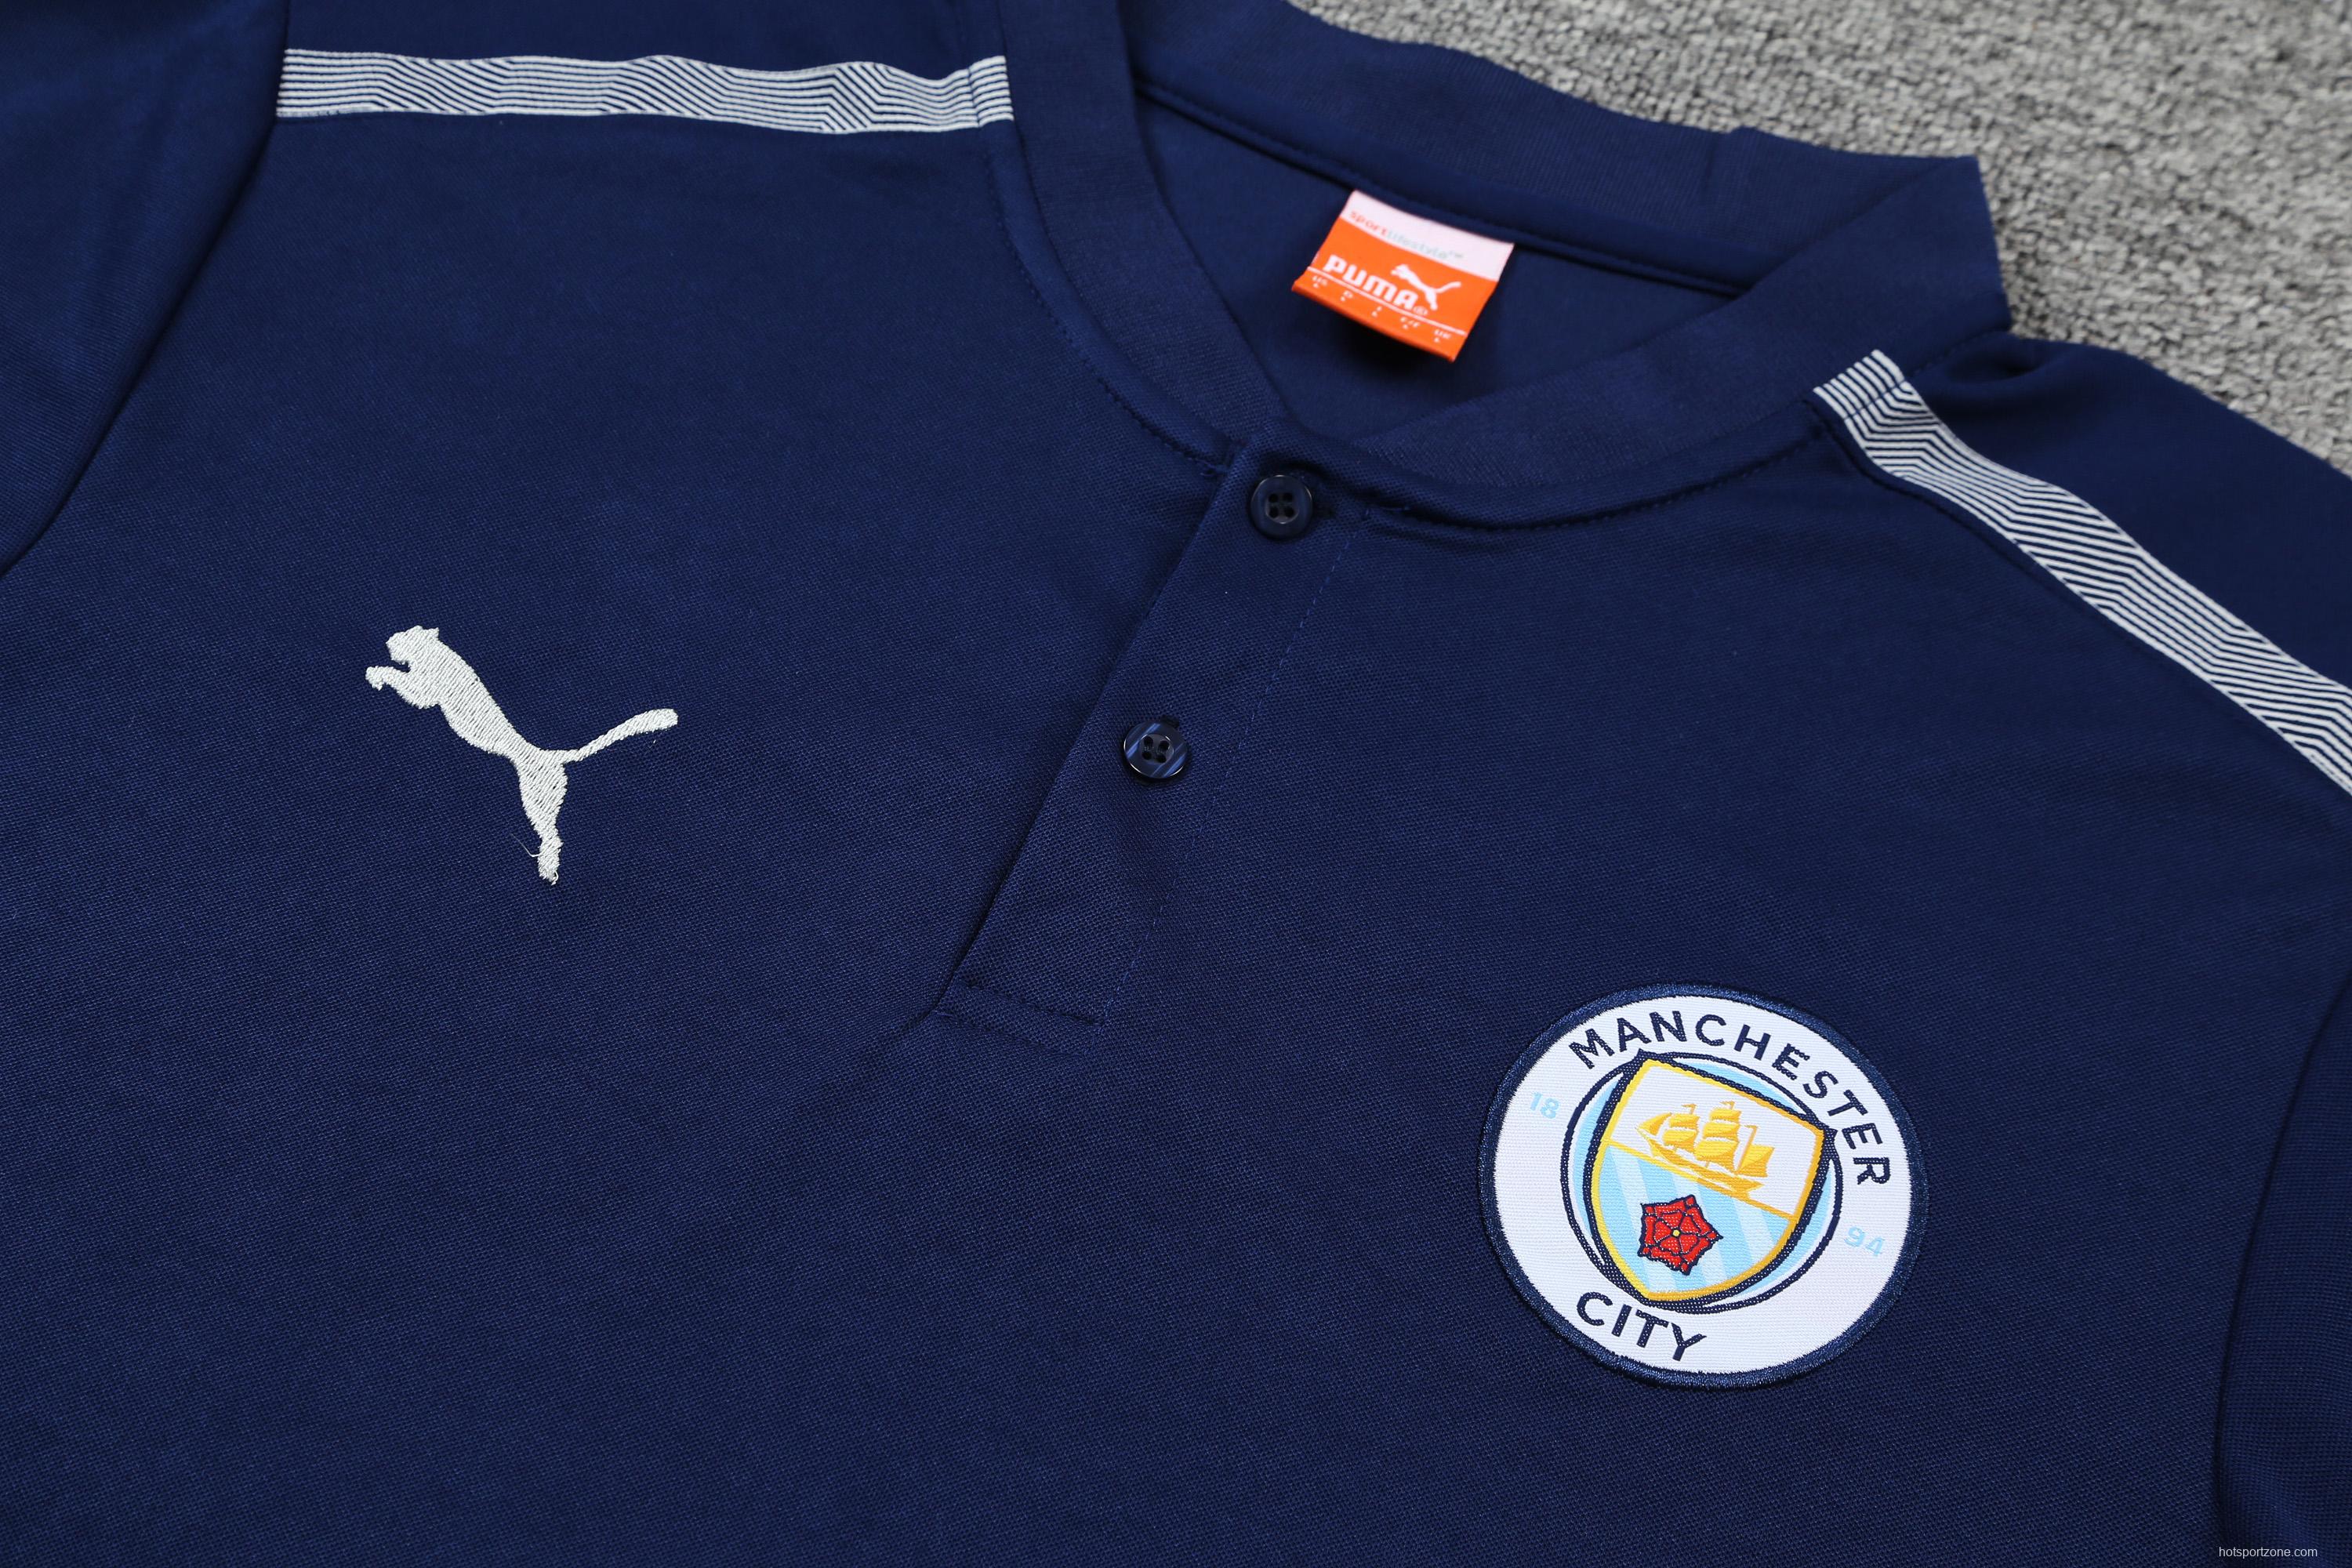 Manchester City POLO kit Dark Blue White Stripe (not supported to be sold separately)